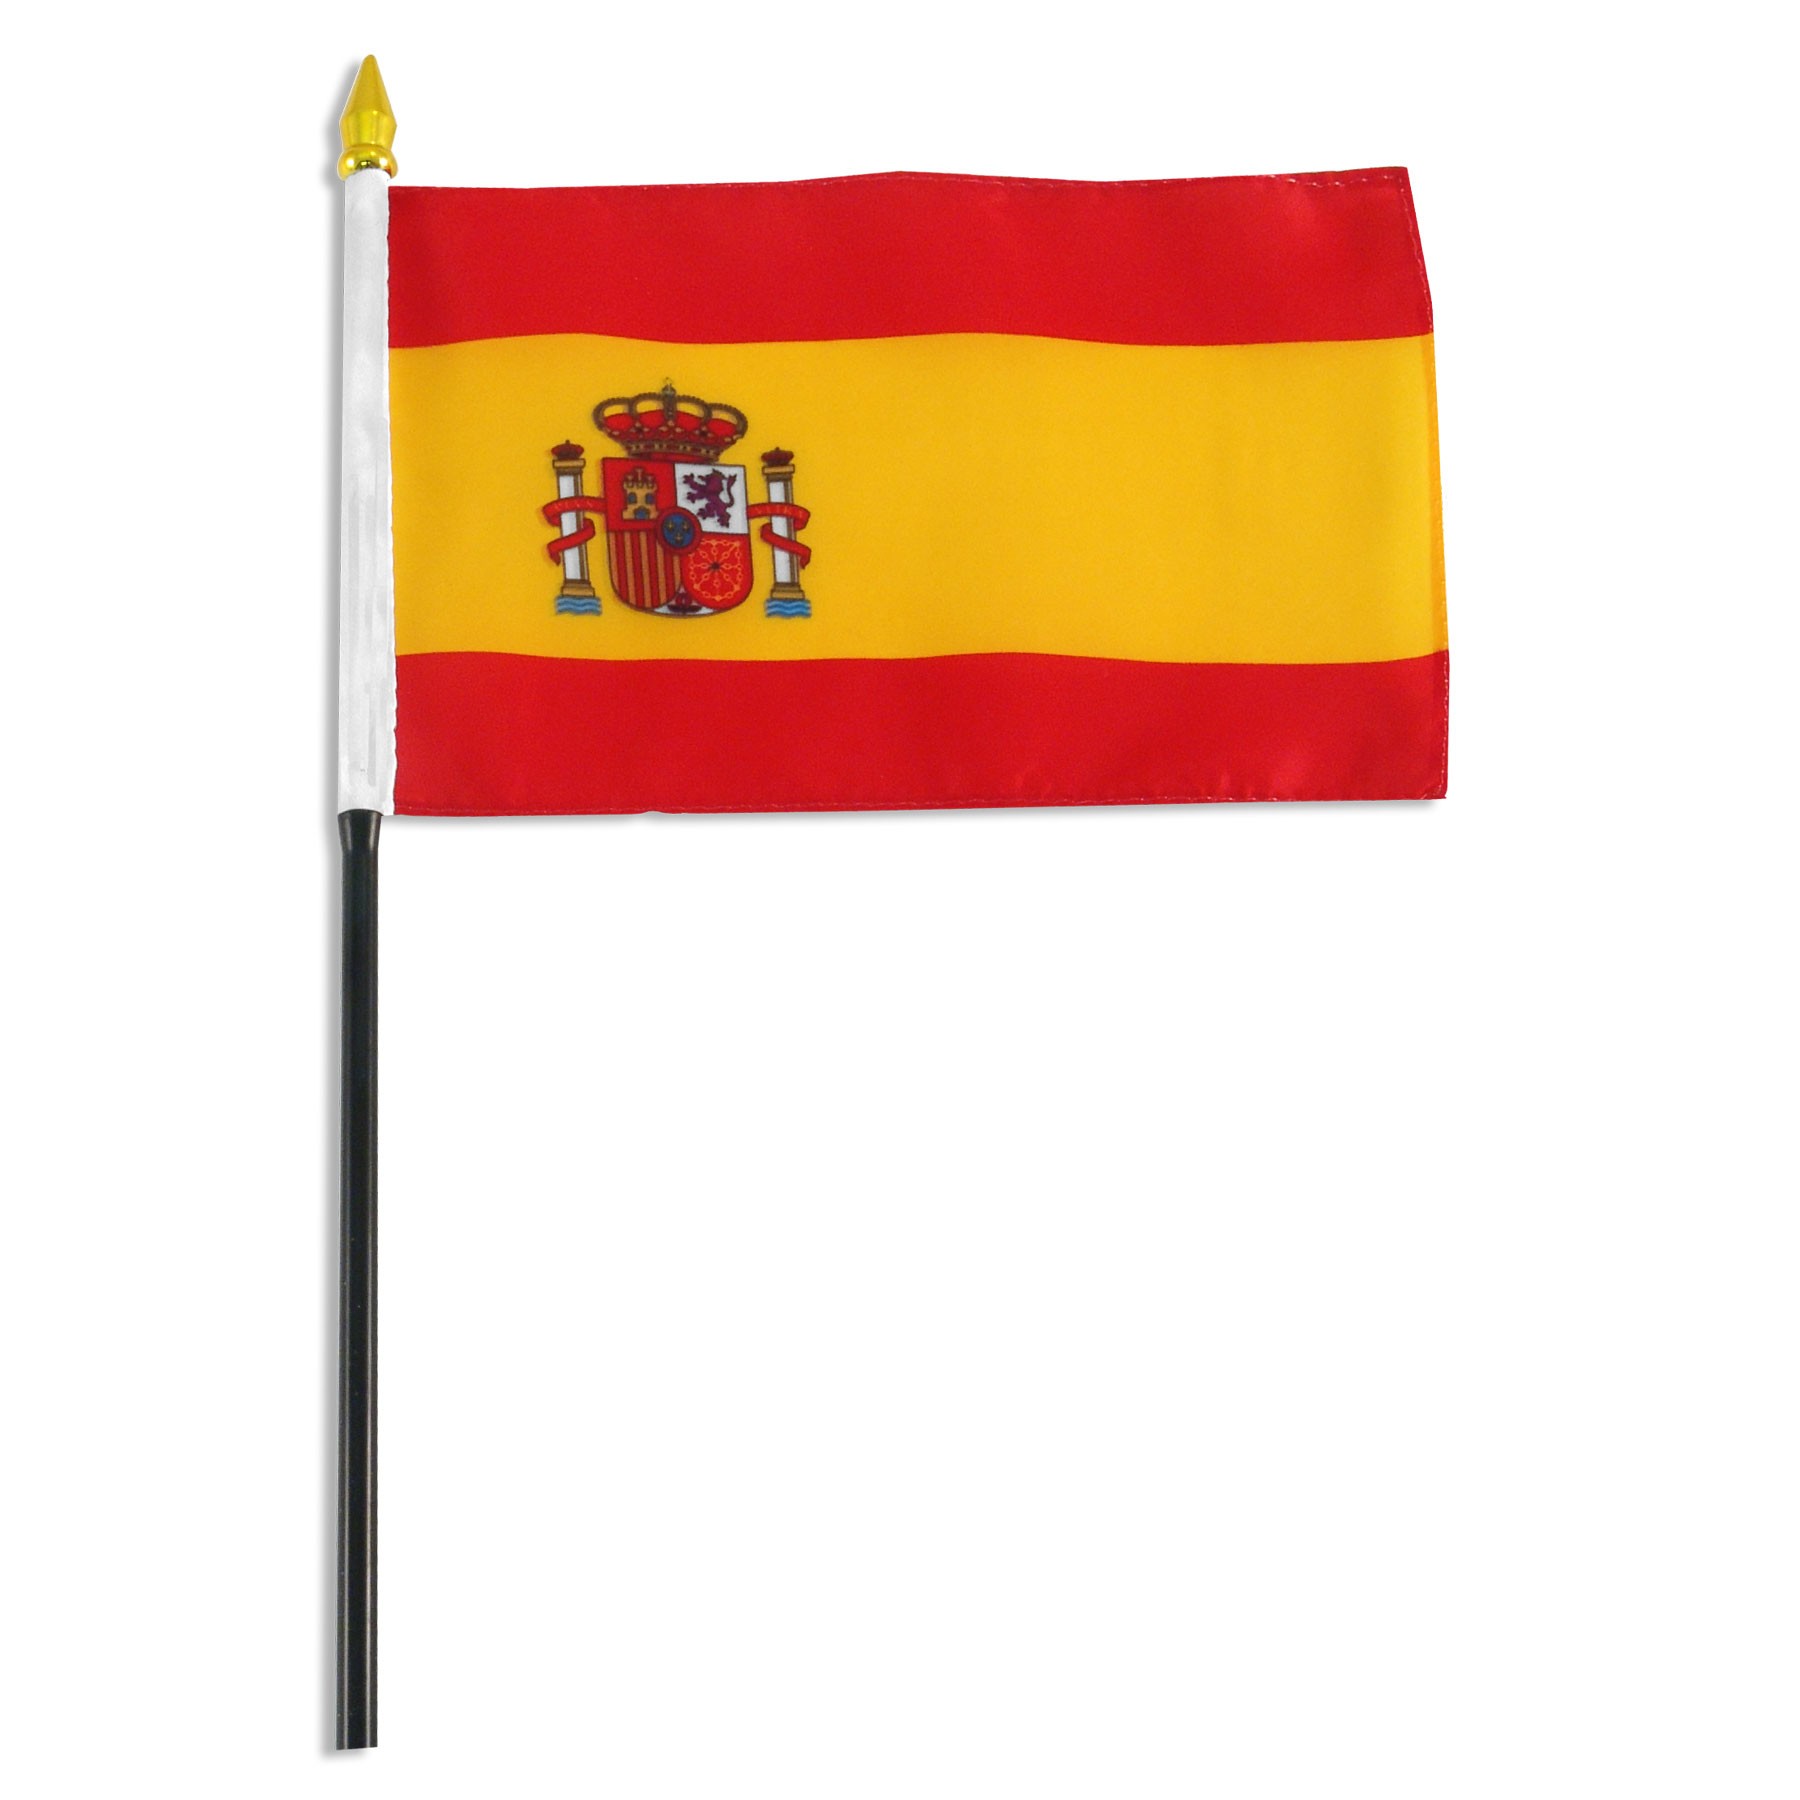 Clipart of the spain flag